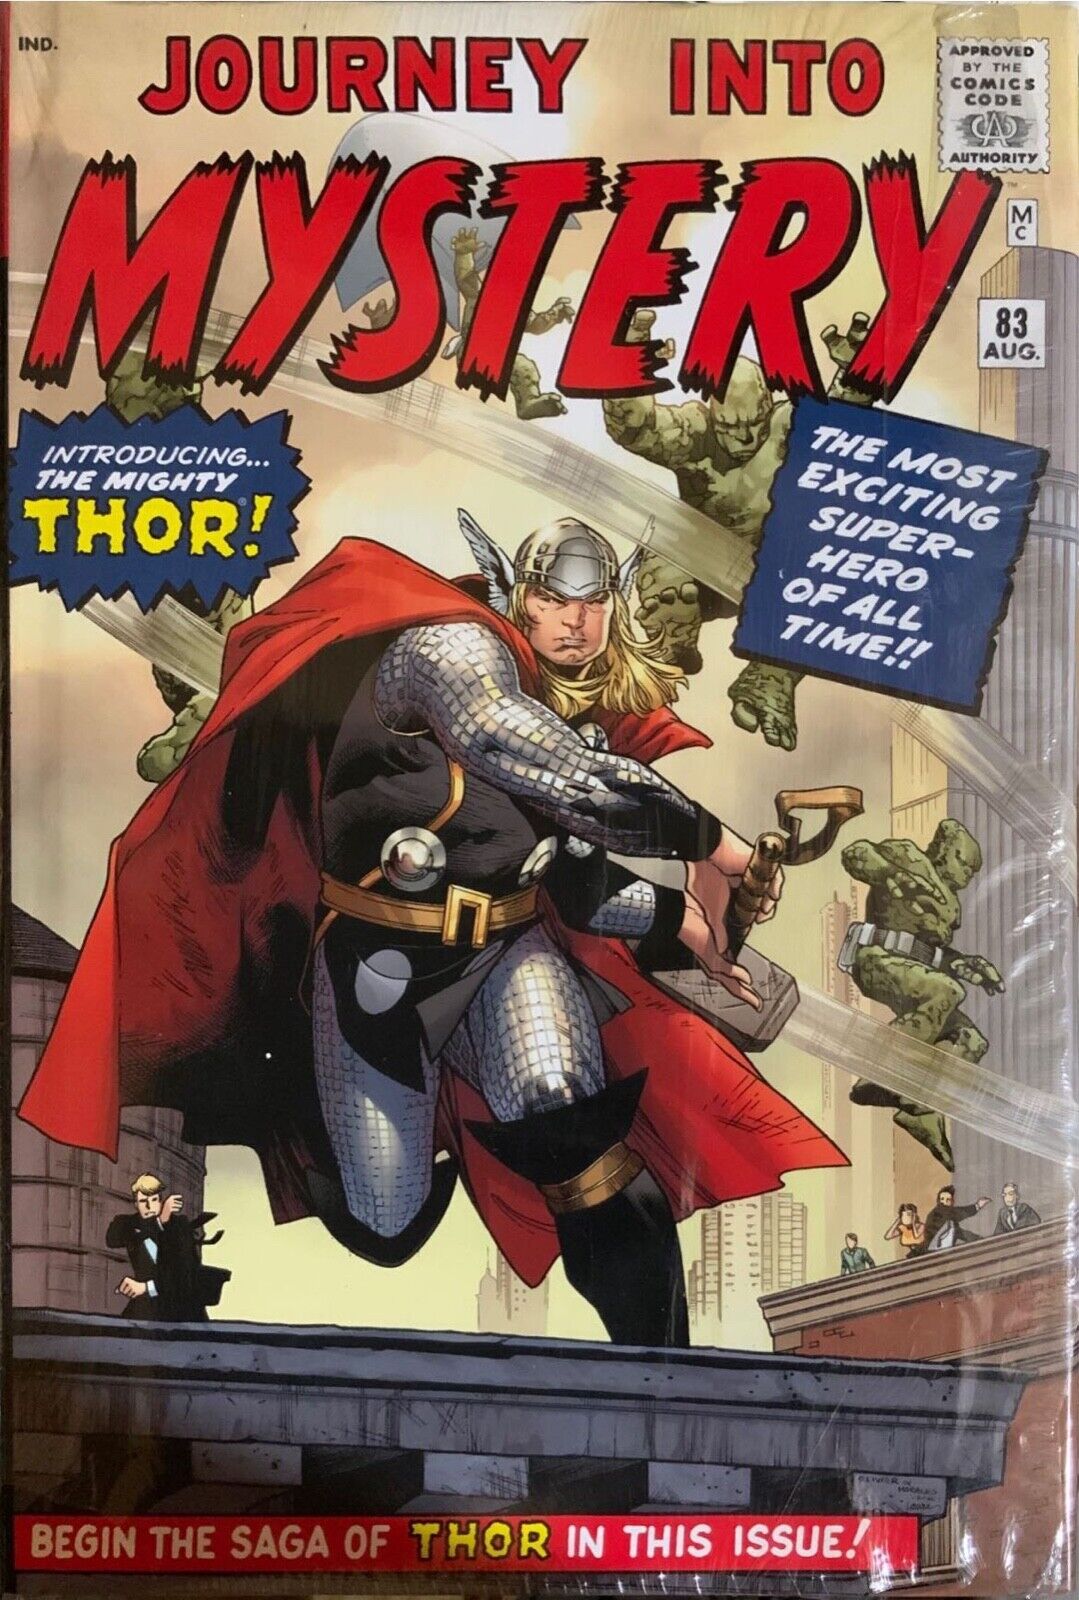 THE MIGHTY THOR OMNIBUS (JOURNEY INTO MYSTERY) VOL.1 BY STAN LEE & JACK KIRBY.